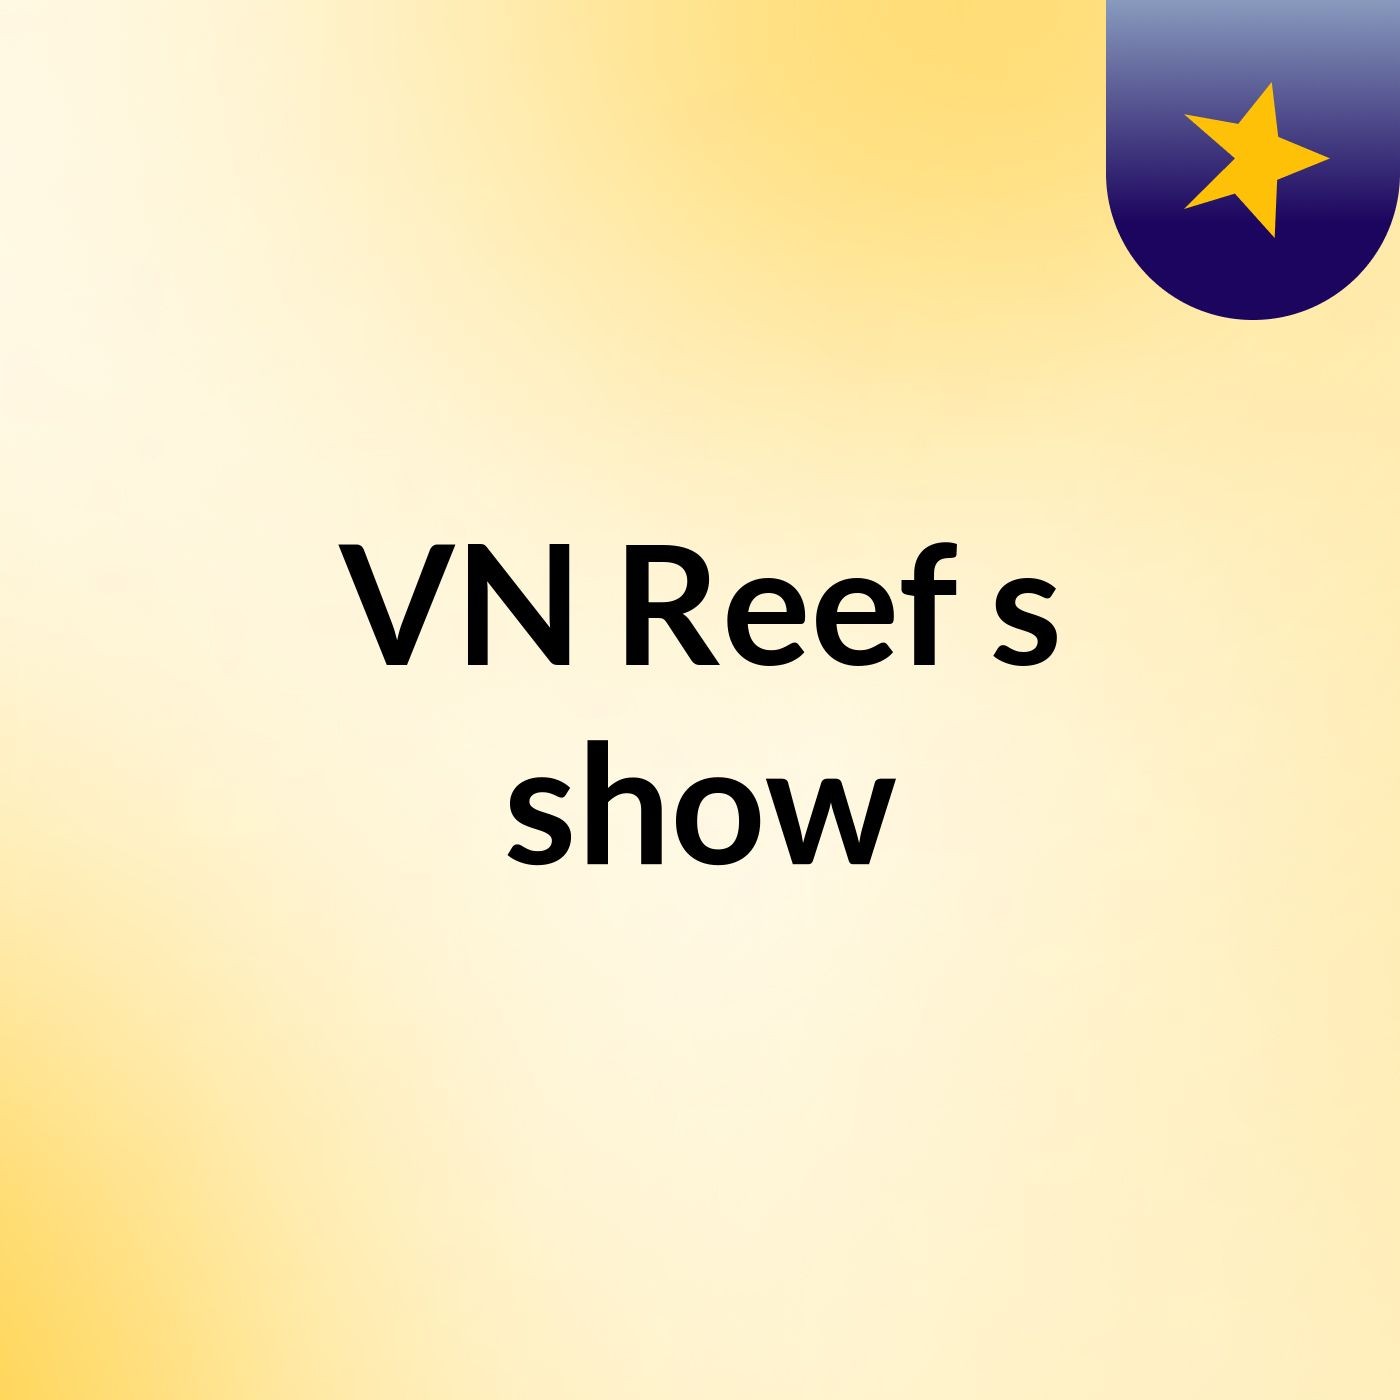 VN Reef's show